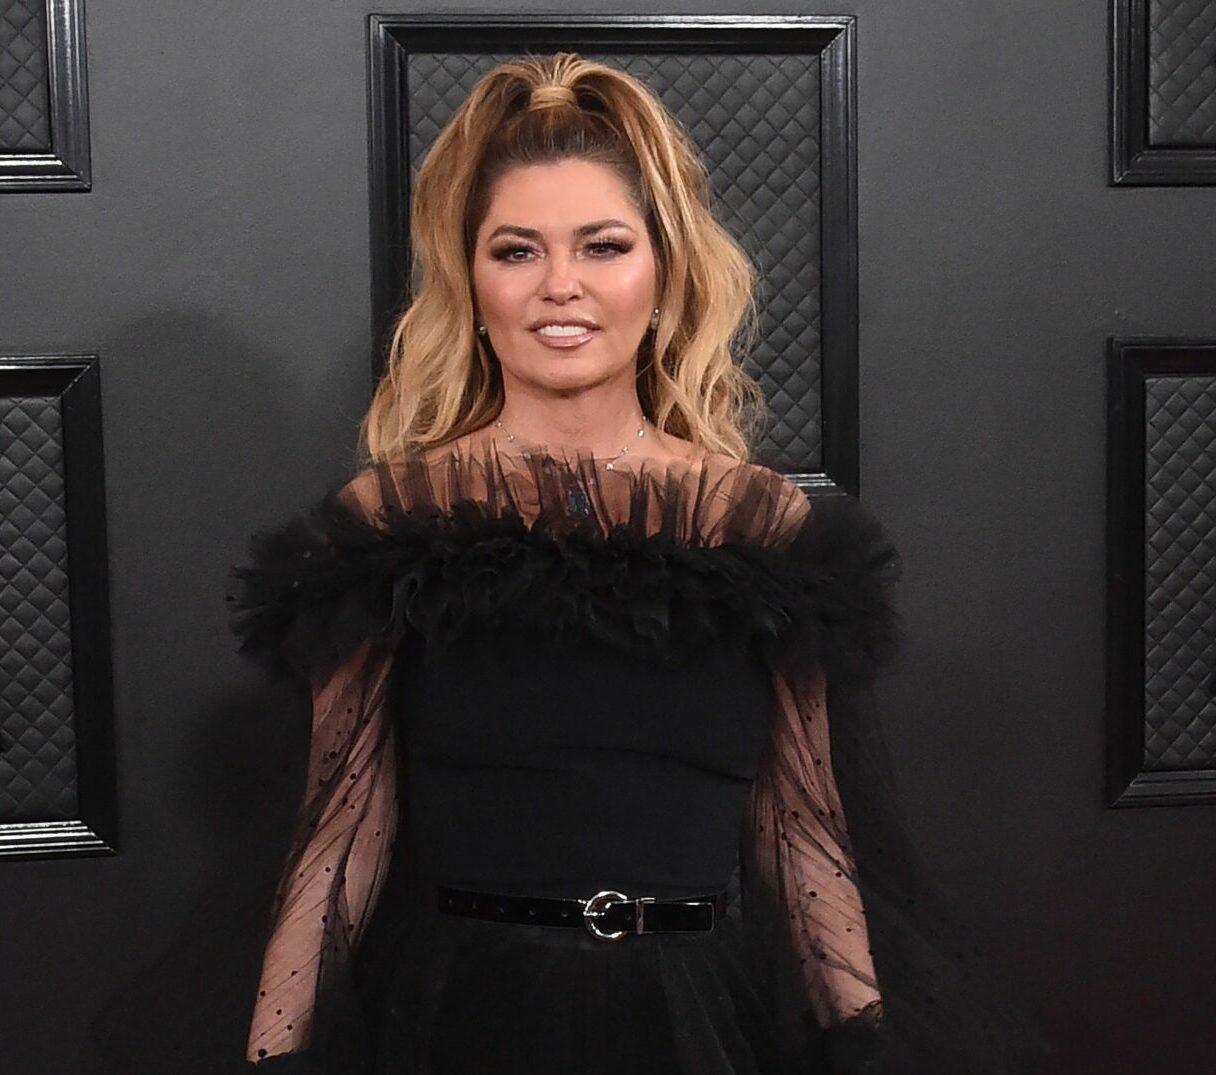 2020 GRAMMY Awards held at Staples Center on January 26, 2020 in Los Angeles, CA. © Arroyo-OConnor / AFF-USA.com. 26 Jan 2020 Pictured: Shania Twain.